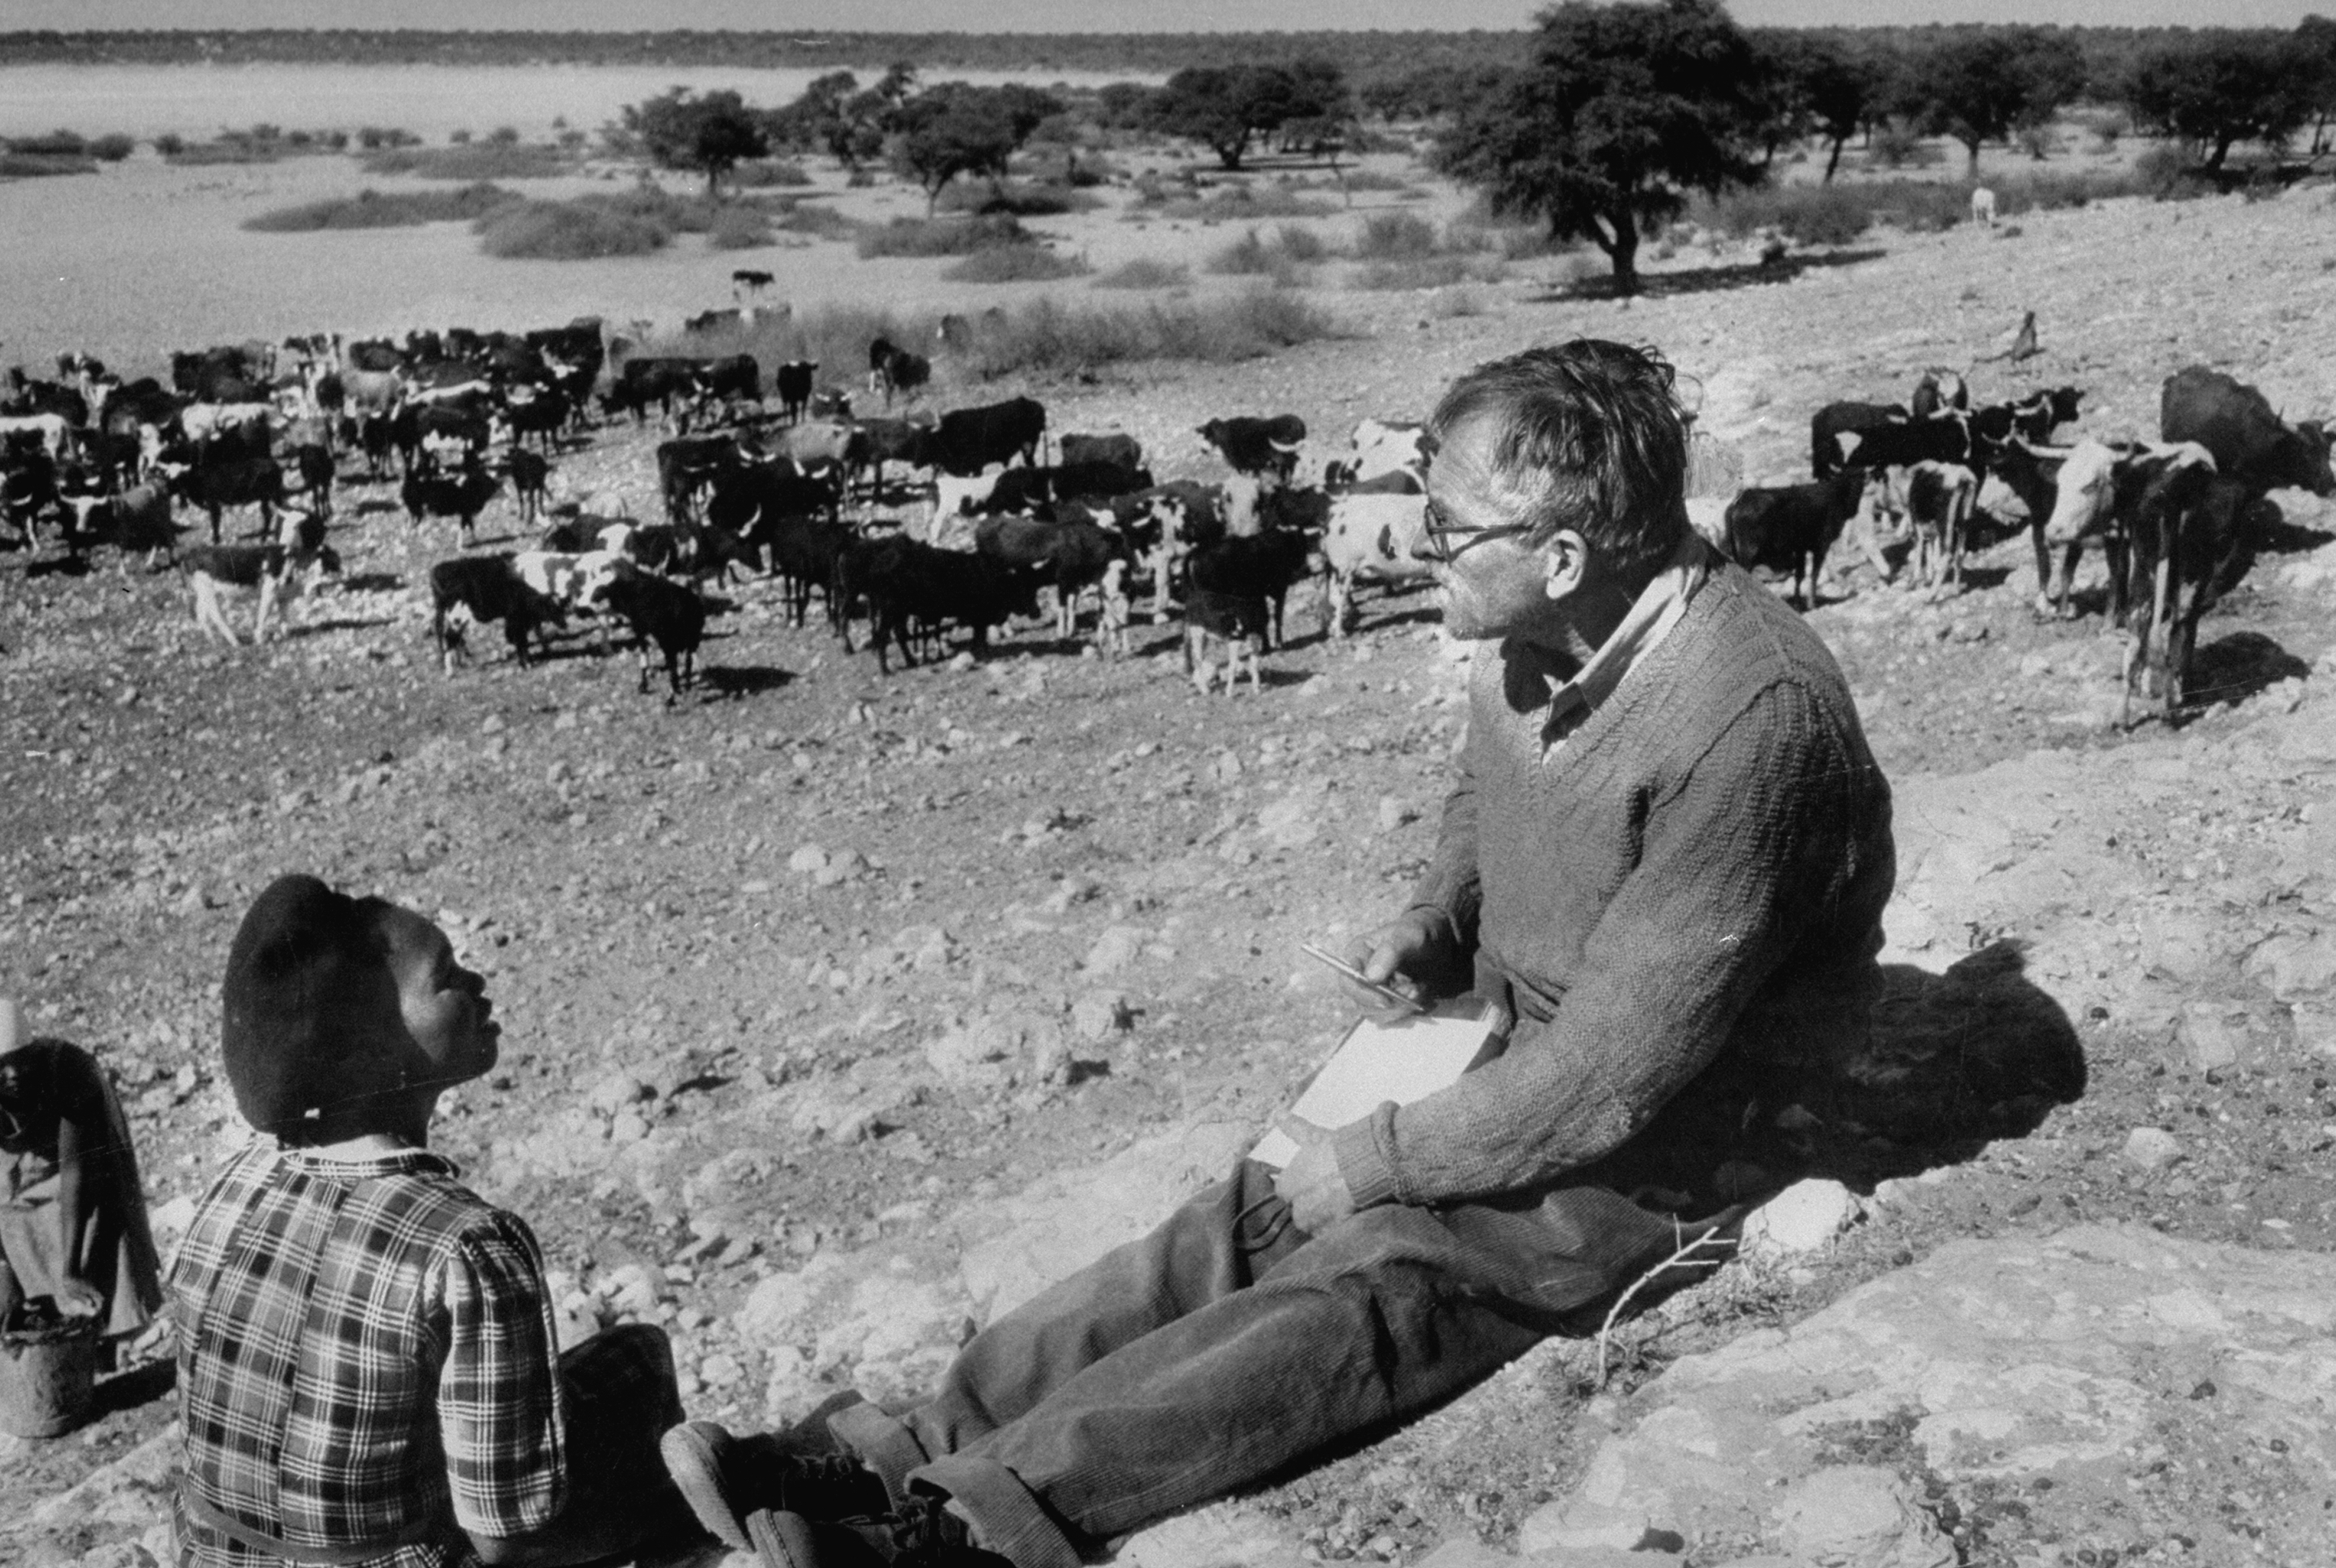 Author, Alan Paton (R) interviewing Herrero woman, Katrina Whiteman against the backdrop of the Tshani well during during his Kalahari expedition in Bechuanaland. (Terence Spencer—The LIFE Images Collection/Getty Images)